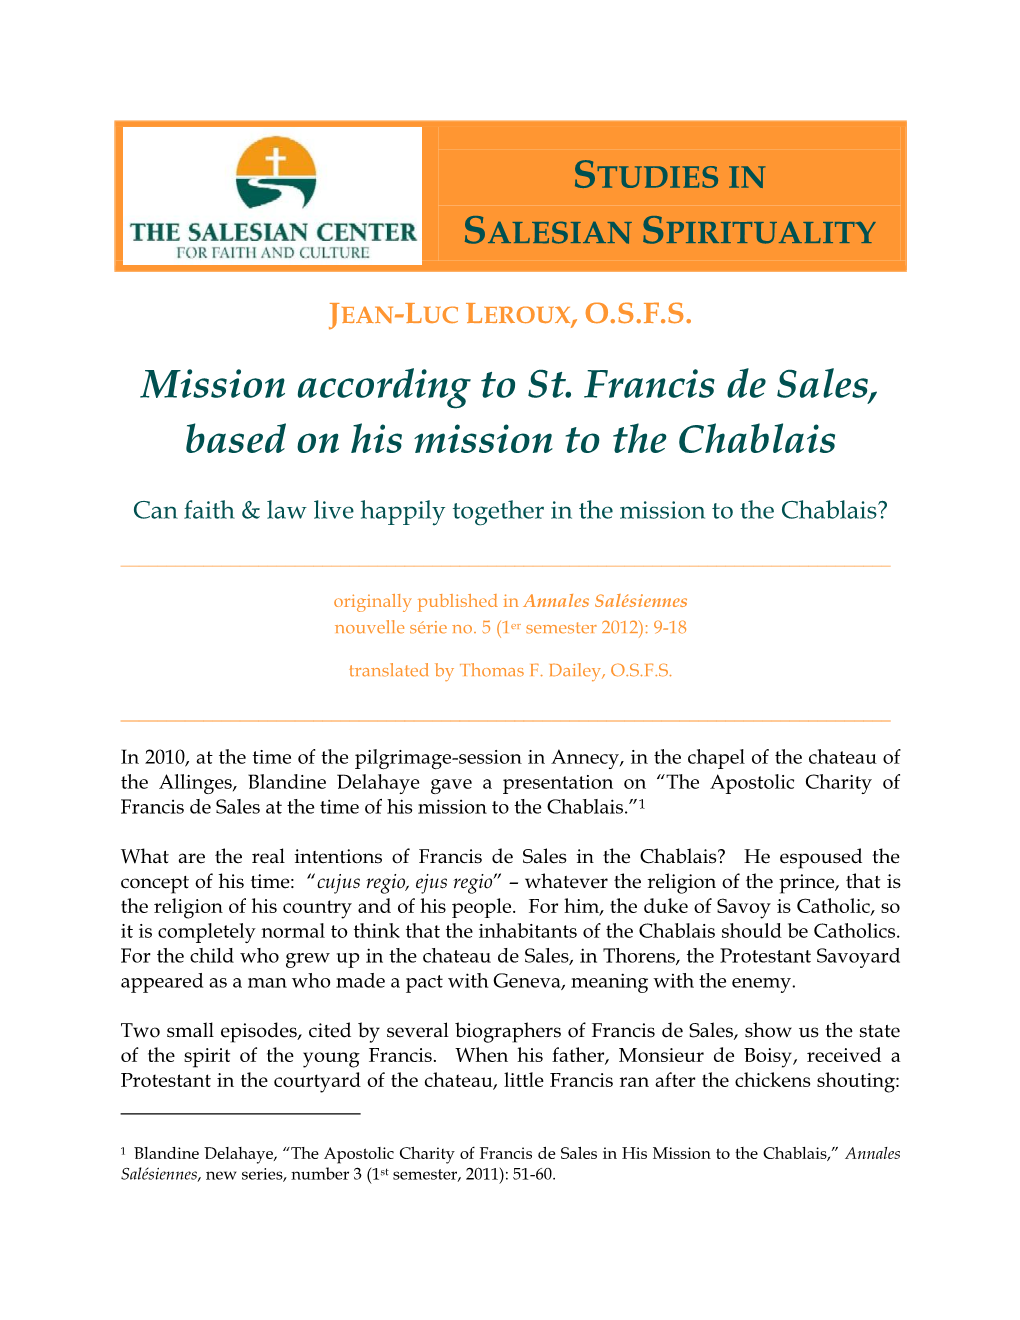 Mission According to St. Francis De Sales, Based on His Mission to The